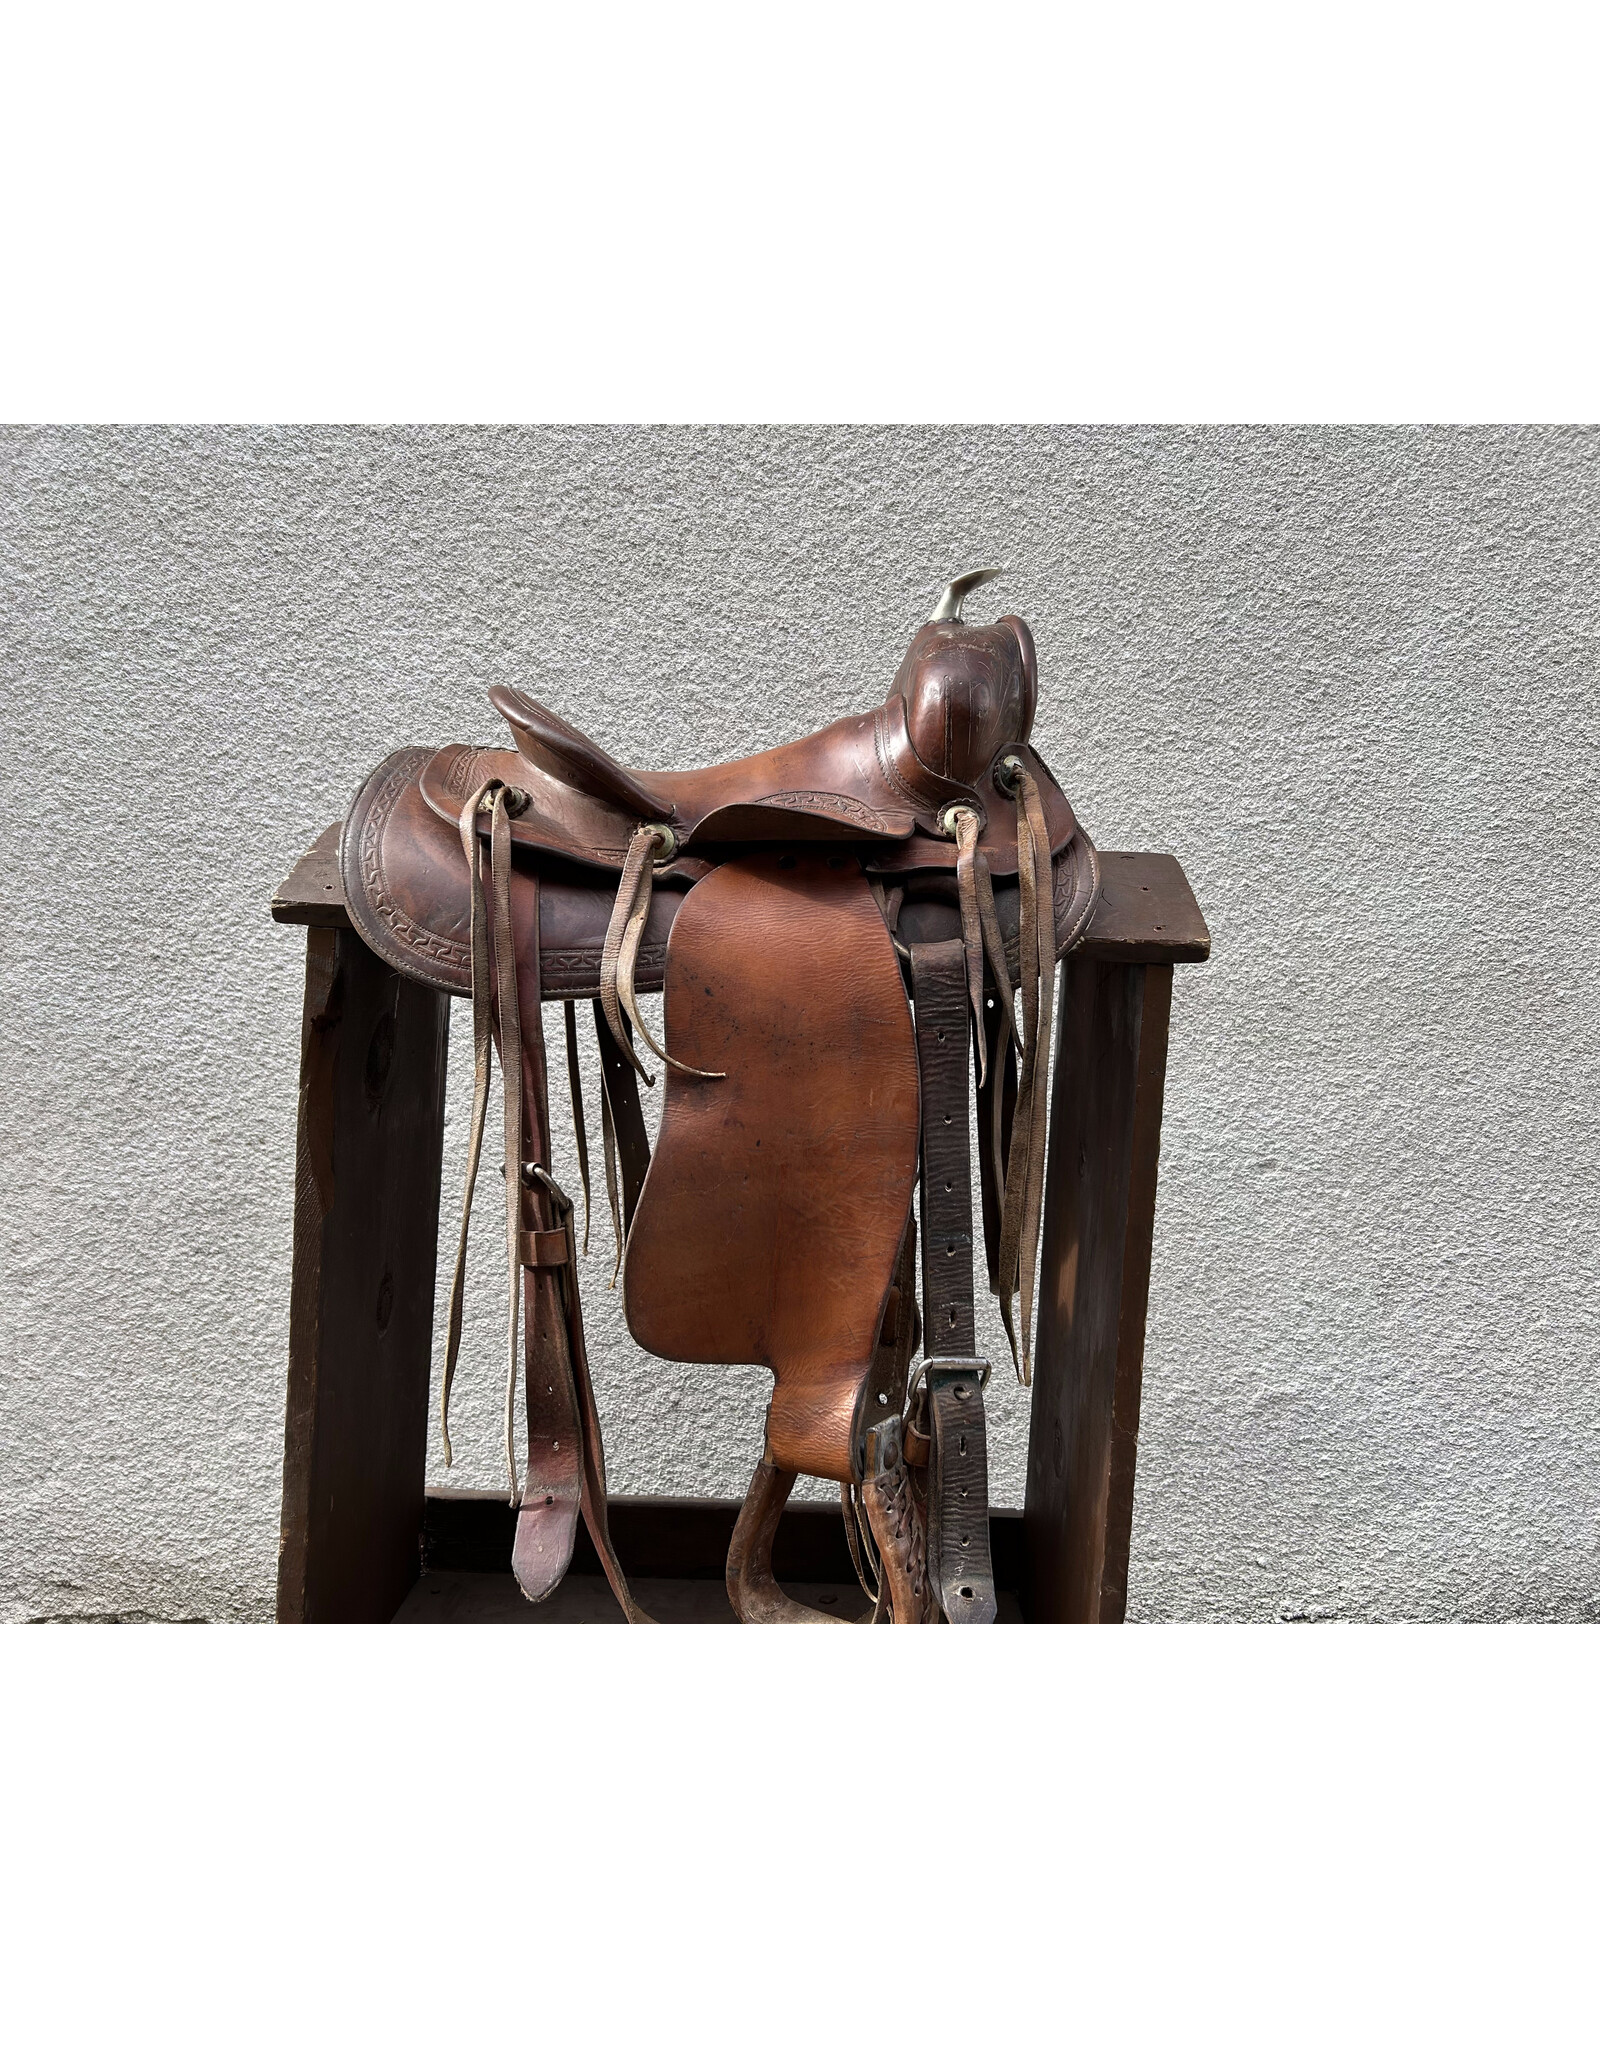 Kids Western Saddle 12" with Metal horn Cap